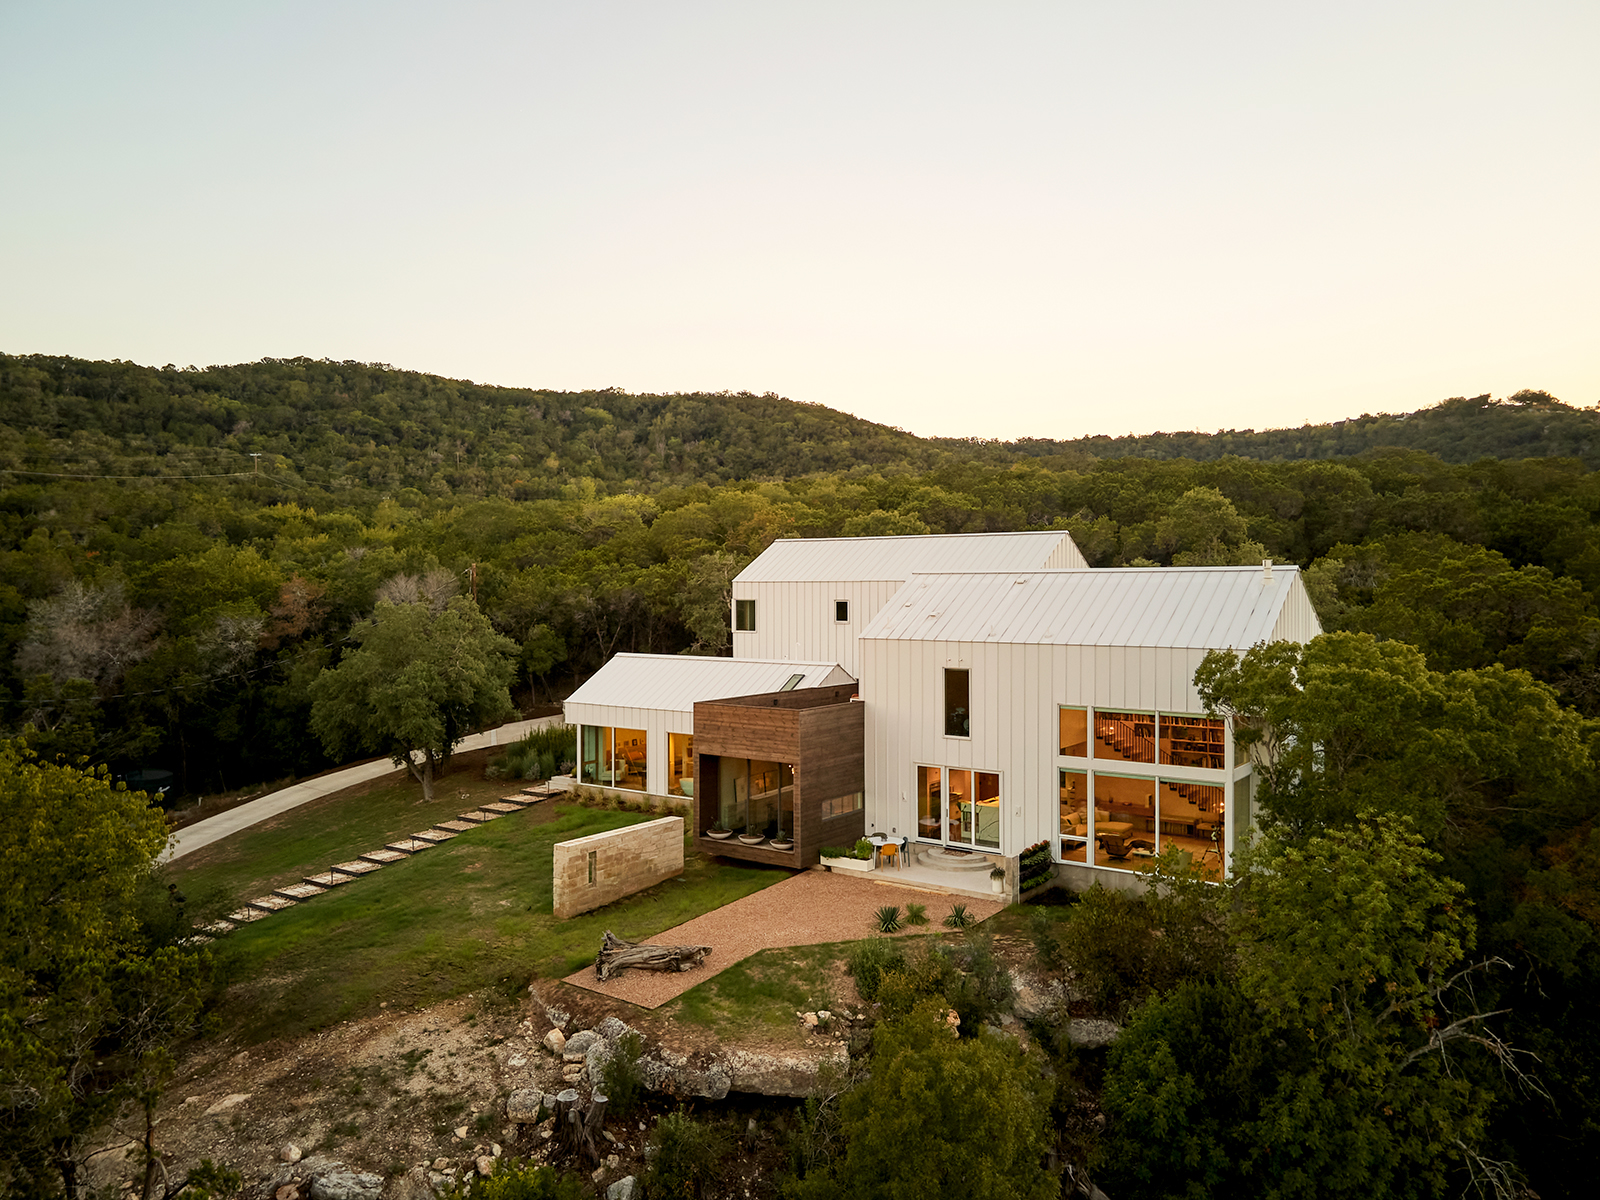 Modern new construction home exterior view in hill country landscape.